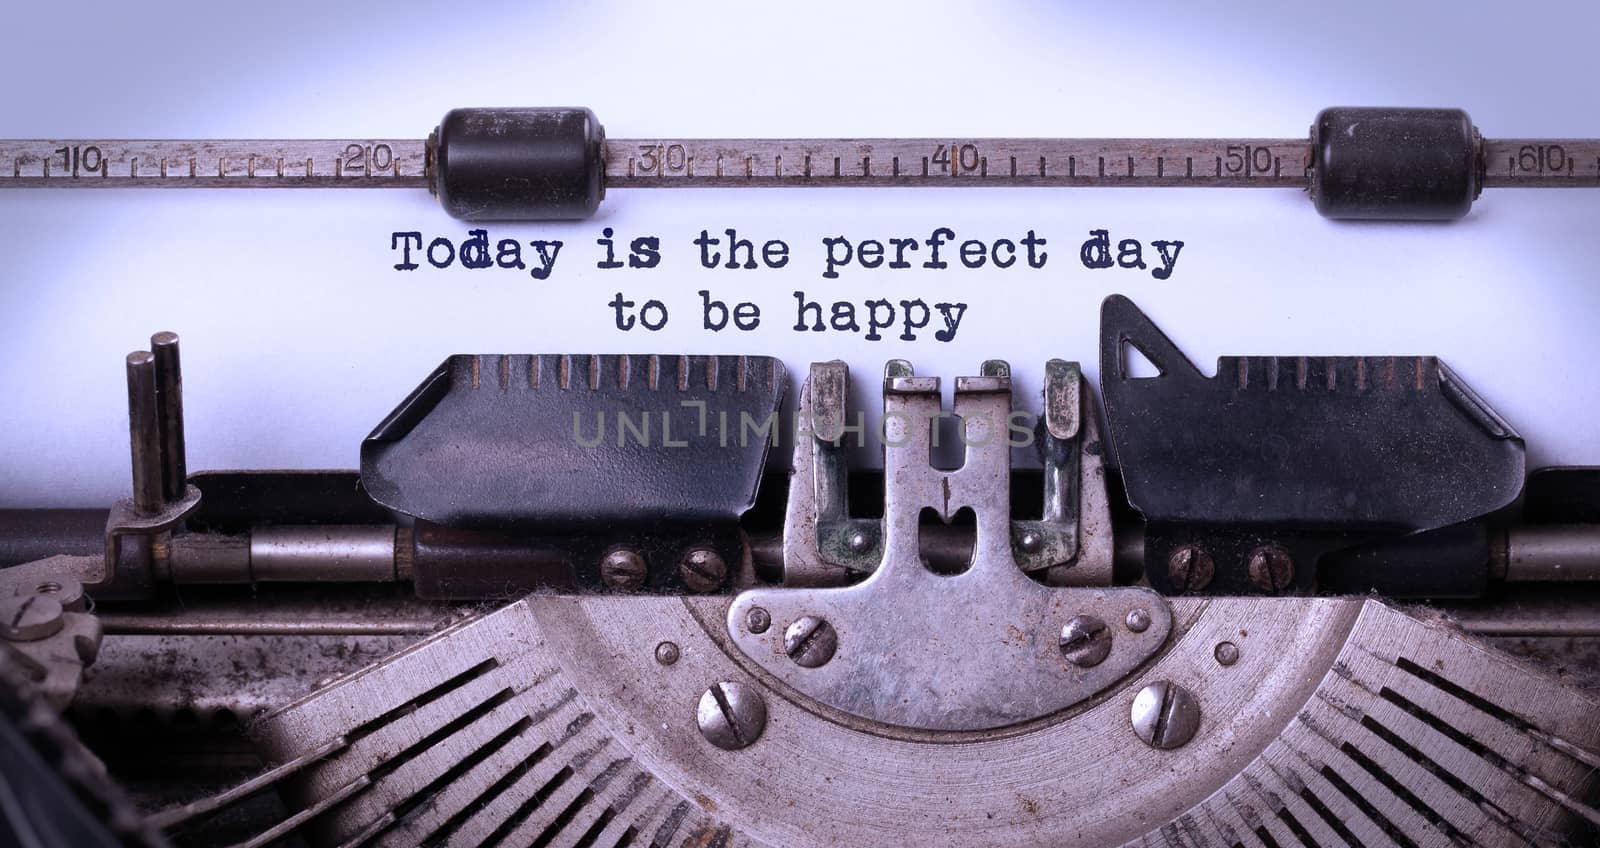 Today is the perfect day to be happy, written on an old typewrit by michaklootwijk